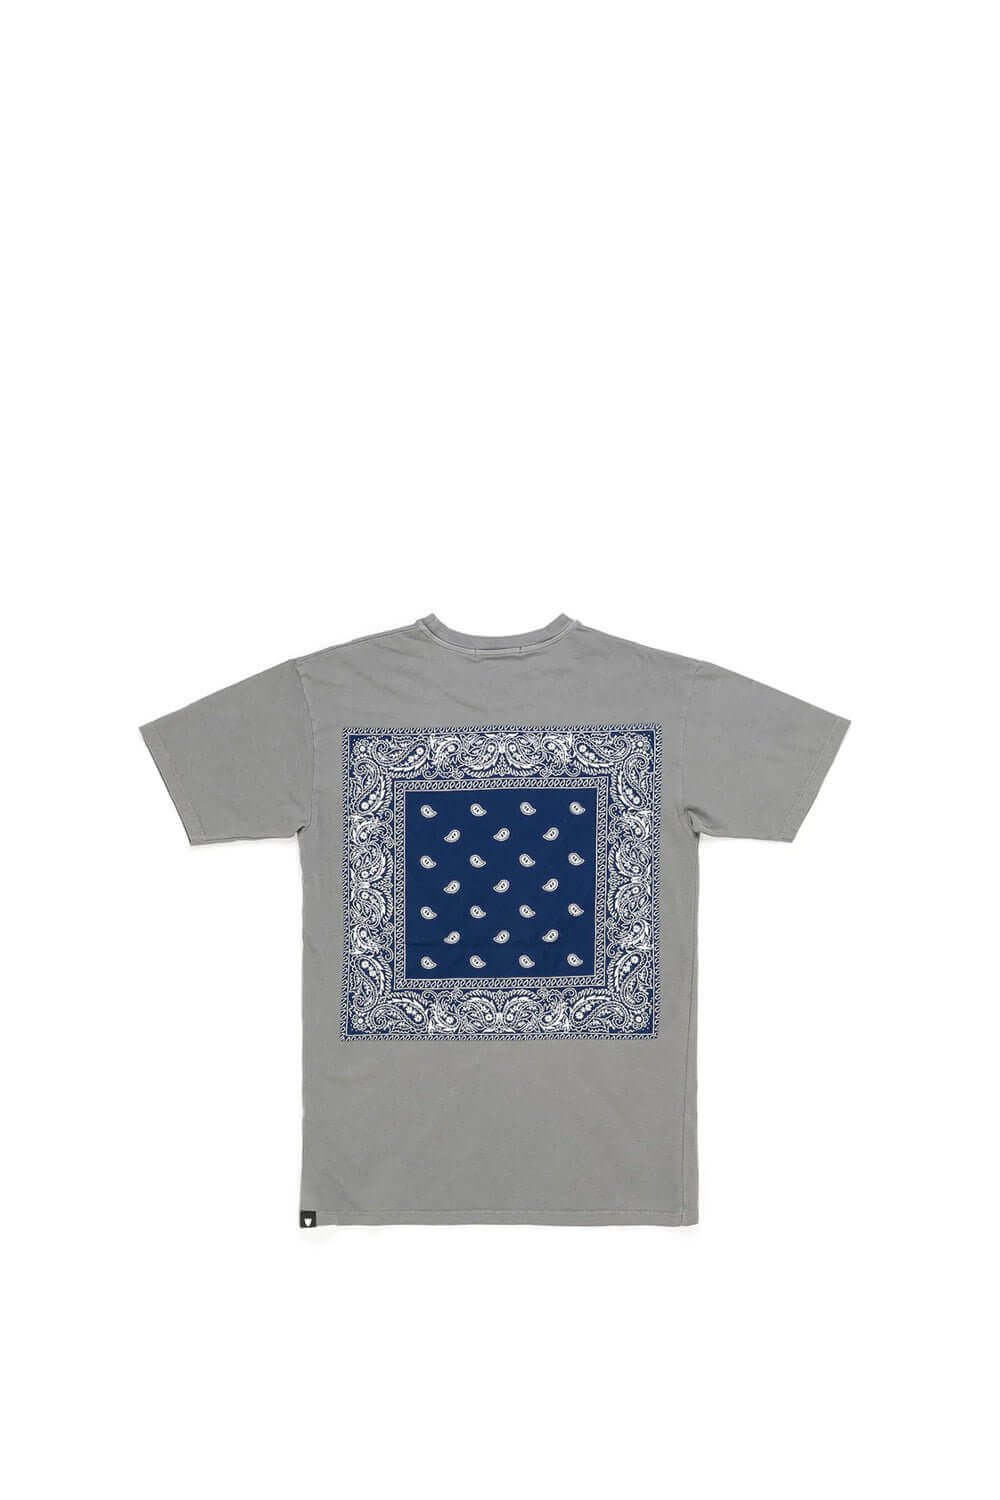 HTC BANDANA T-SHIRT Regular fit t-shirt with printed mini-logo on the front. Vintage bandana set on the back. 100% cotton. Made in Italy. HTC LOS ANGELES